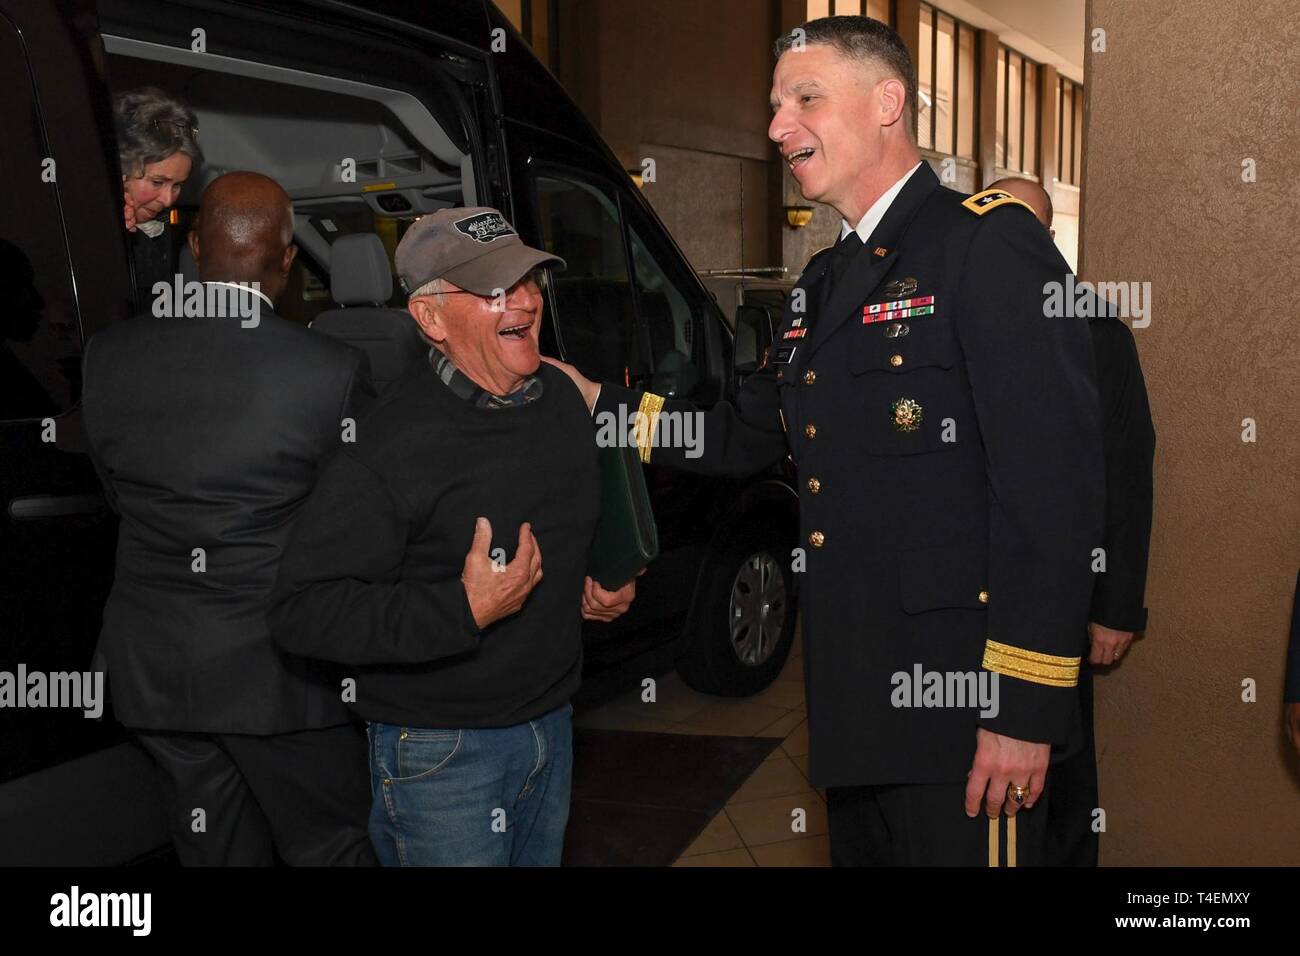 Vice Chief of Staff of the US Army Lt. Gen. Joseph M. Martin greets Trevor Oliver and Jack and Elanine Atkins, family of Staff Sgt. Travis Atkins, upon arrival at the Sheraton Pentagon City Hotel, Arlington, Va., March 24, 2019. Staff Sgt. Atkins will be posthumously awarded the Medal of Honor for actions while serving with Delta Company, 2nd Battalion, 14th Infantry Regiment, 2nd Bridgade Combat Team, 10th Mountain Division, in Abu Sarnak, Iraq, in support of Operation Iraqi Freedom, on June 1 2007. His extraordinary heroism in attempting to subdue a suicide bomber and shielding three soldier Stock Photo